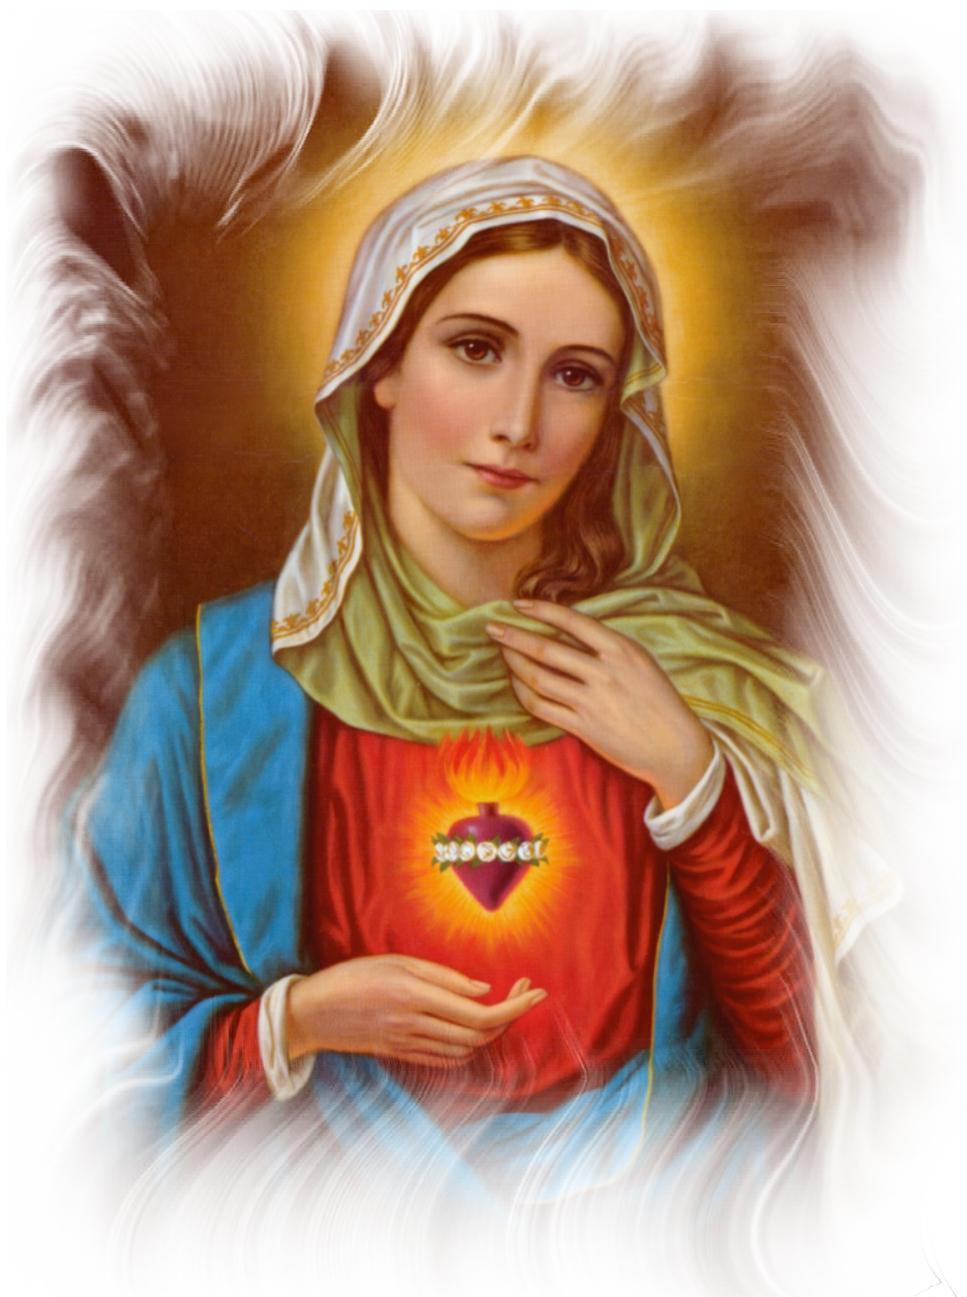 Mother Mary HD Wallpaper For Mobile , Find HD Wallpaper For Free